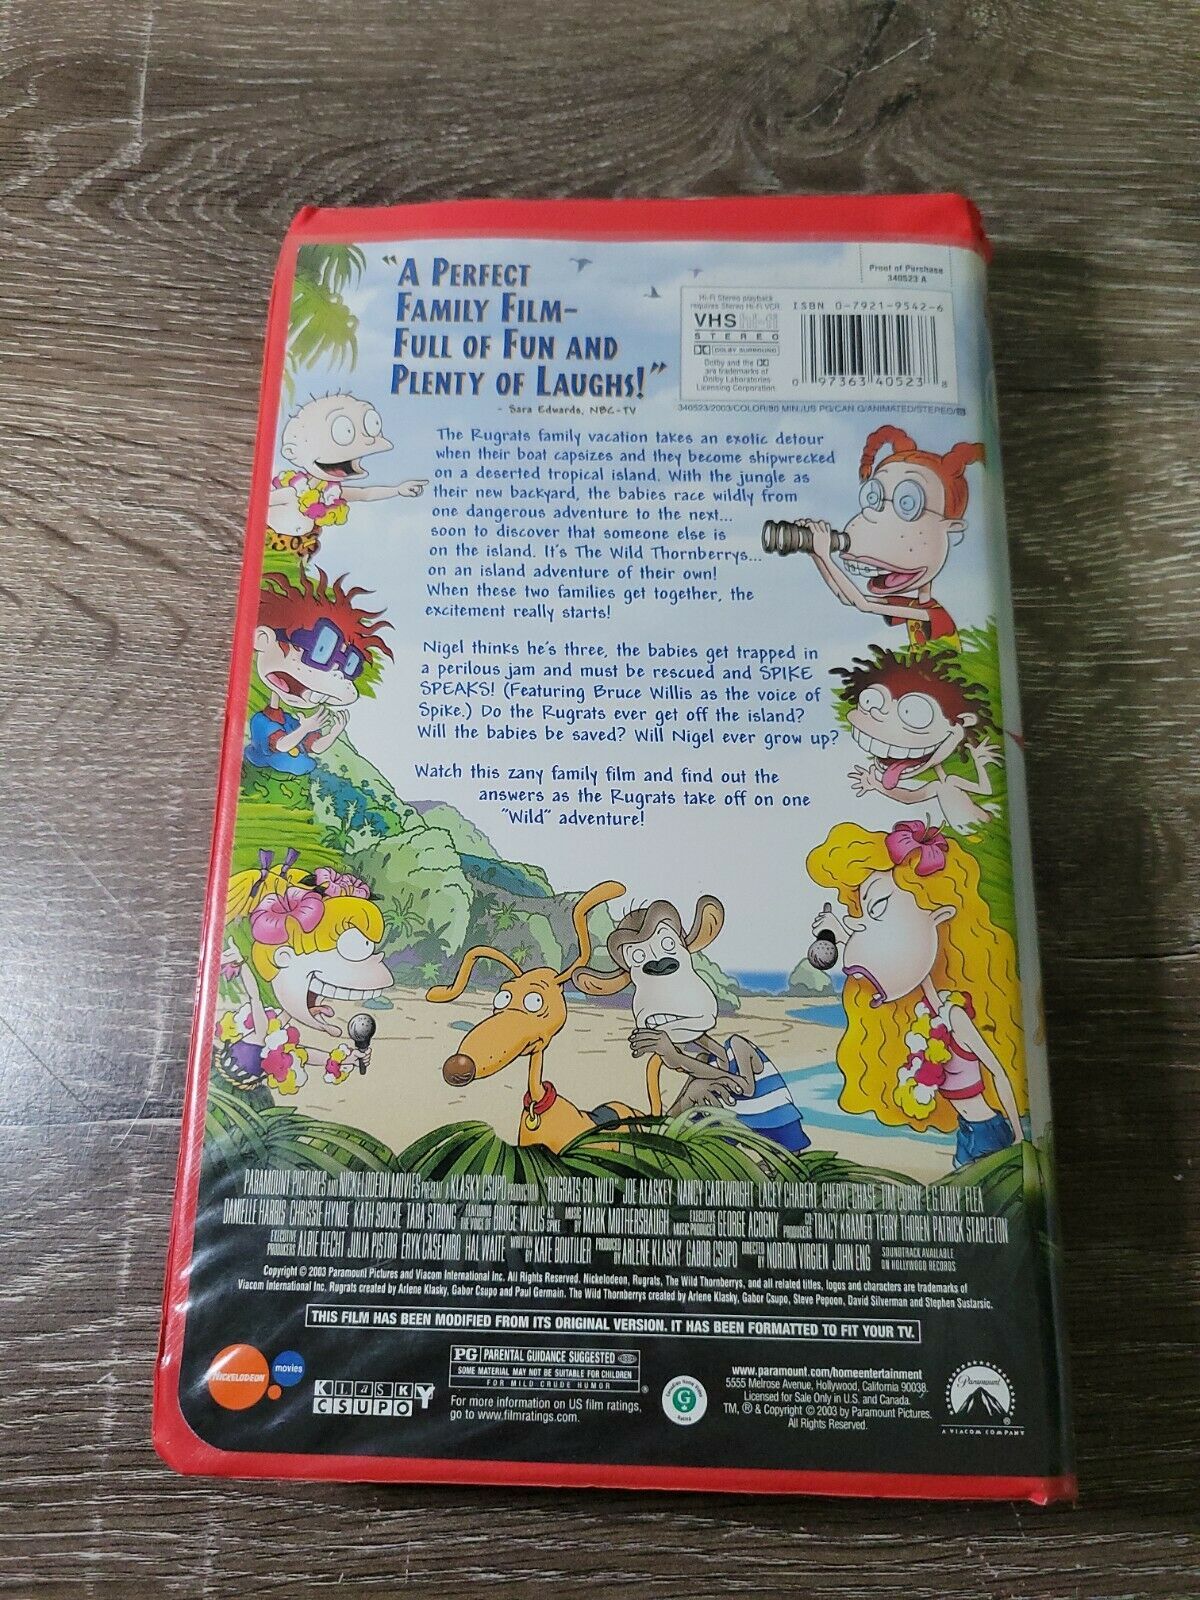 Rugrats Go Wild VHS TAPE. Nickelodeon - VHS Tapes